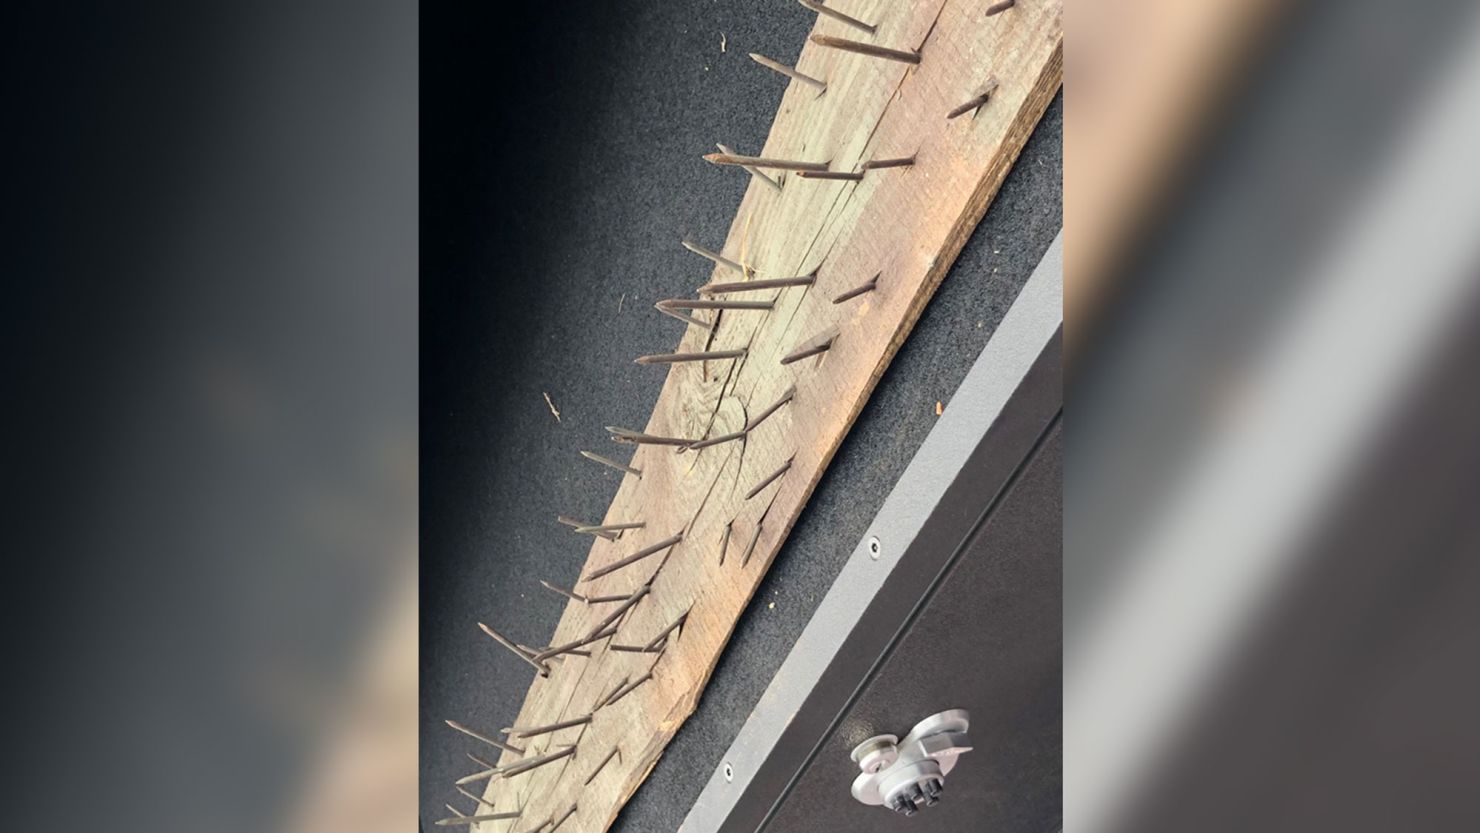 A DeKalb County official said hidden traps, including boards with nails hidden by leaves and underbrush, were found.